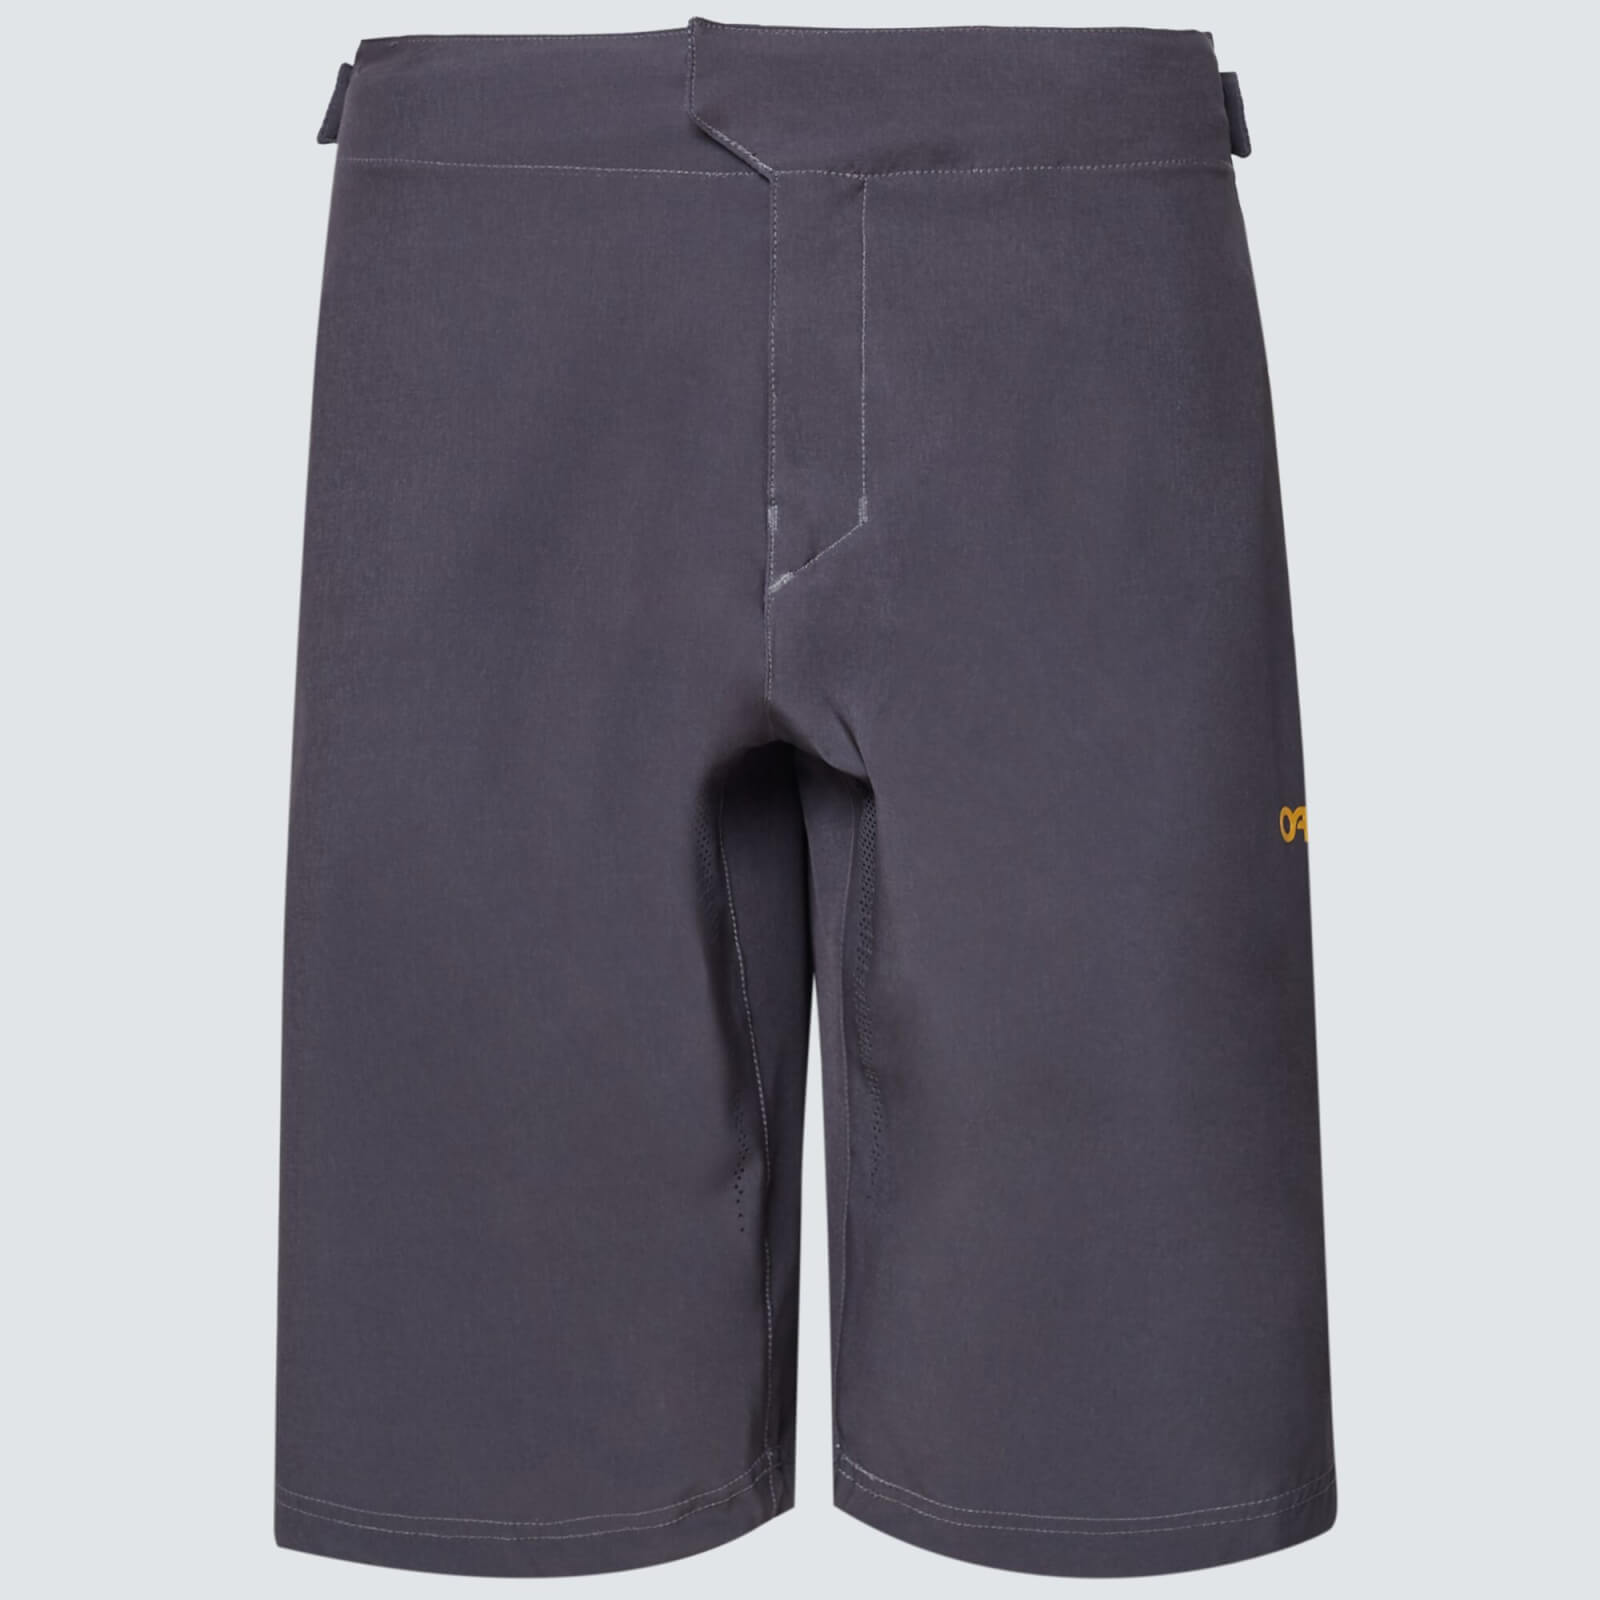 Oakley Reduct Berm Shorts - 33 - Forged Iron